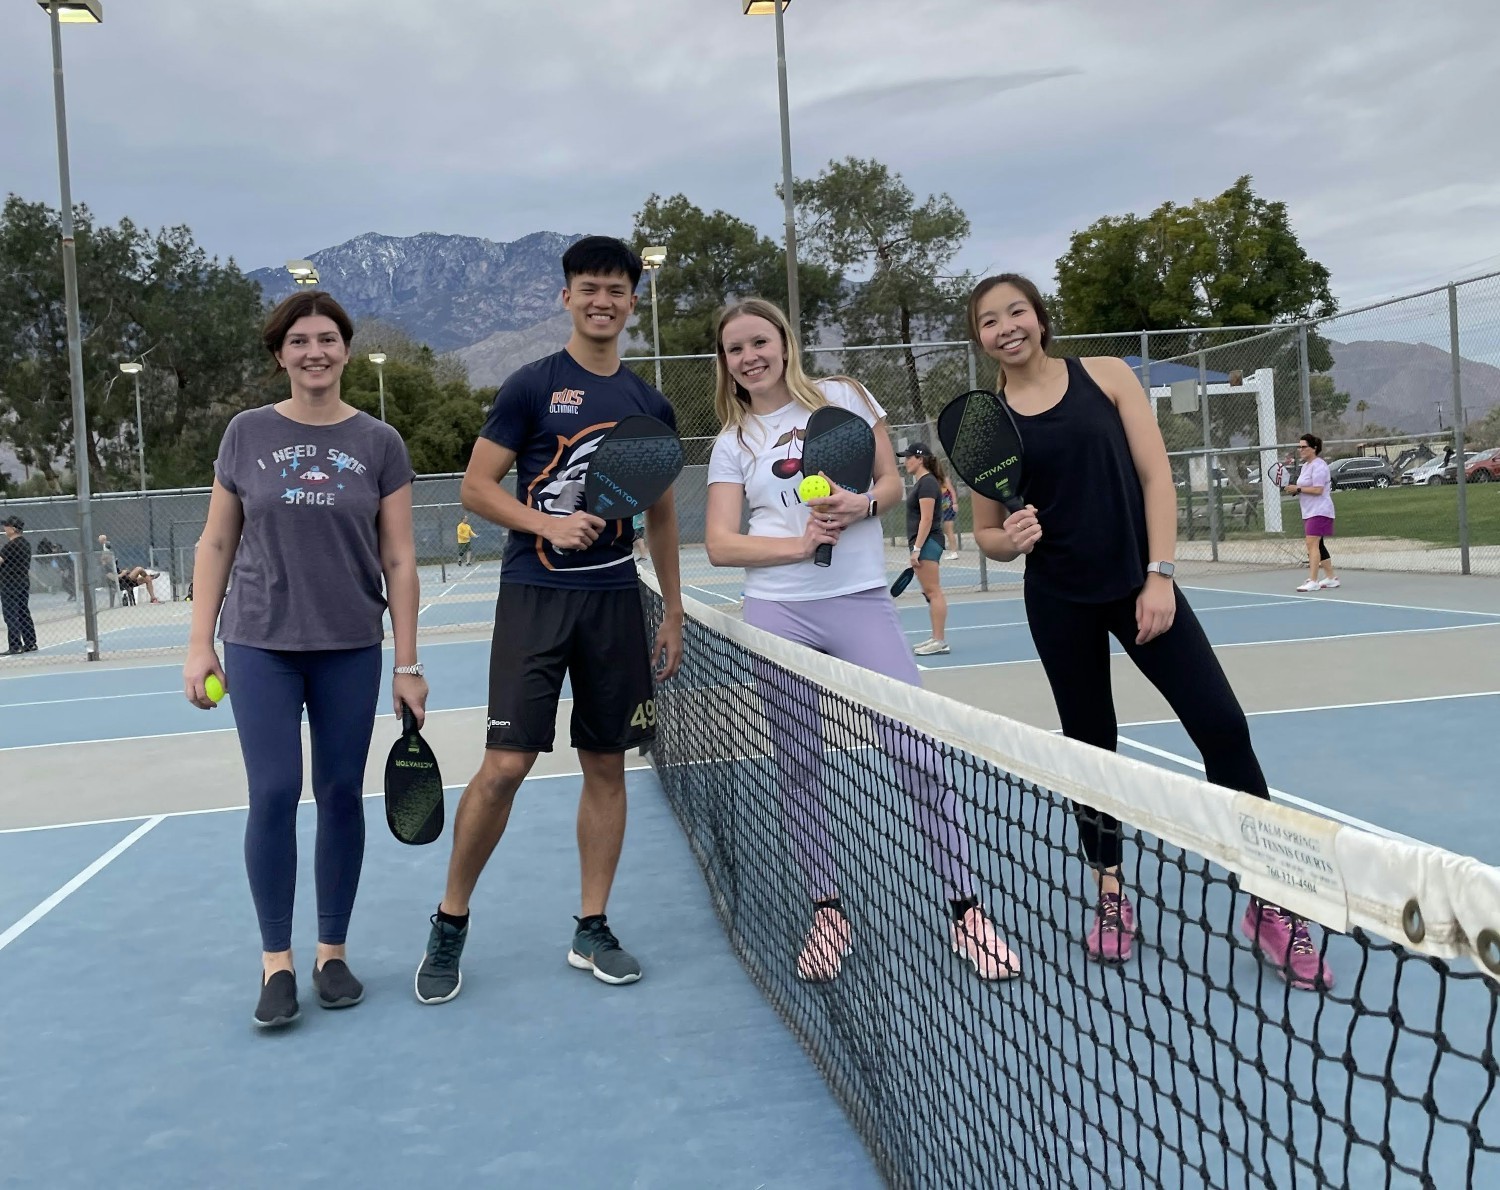 The CodeSignal team bonds over a game of Tennis during our 2022 Americas Meetup.